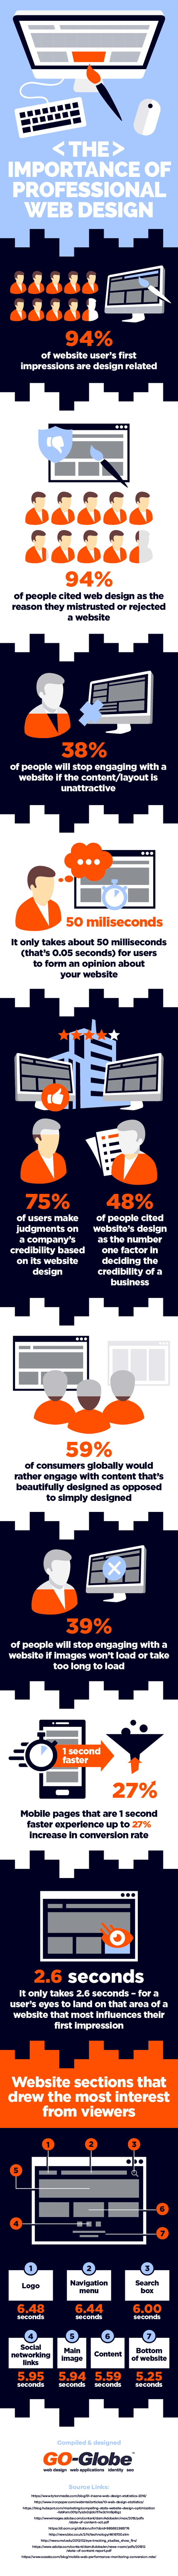 DIY-Website-or-Professional-Designer-10-Stats-You-Need-to-Know